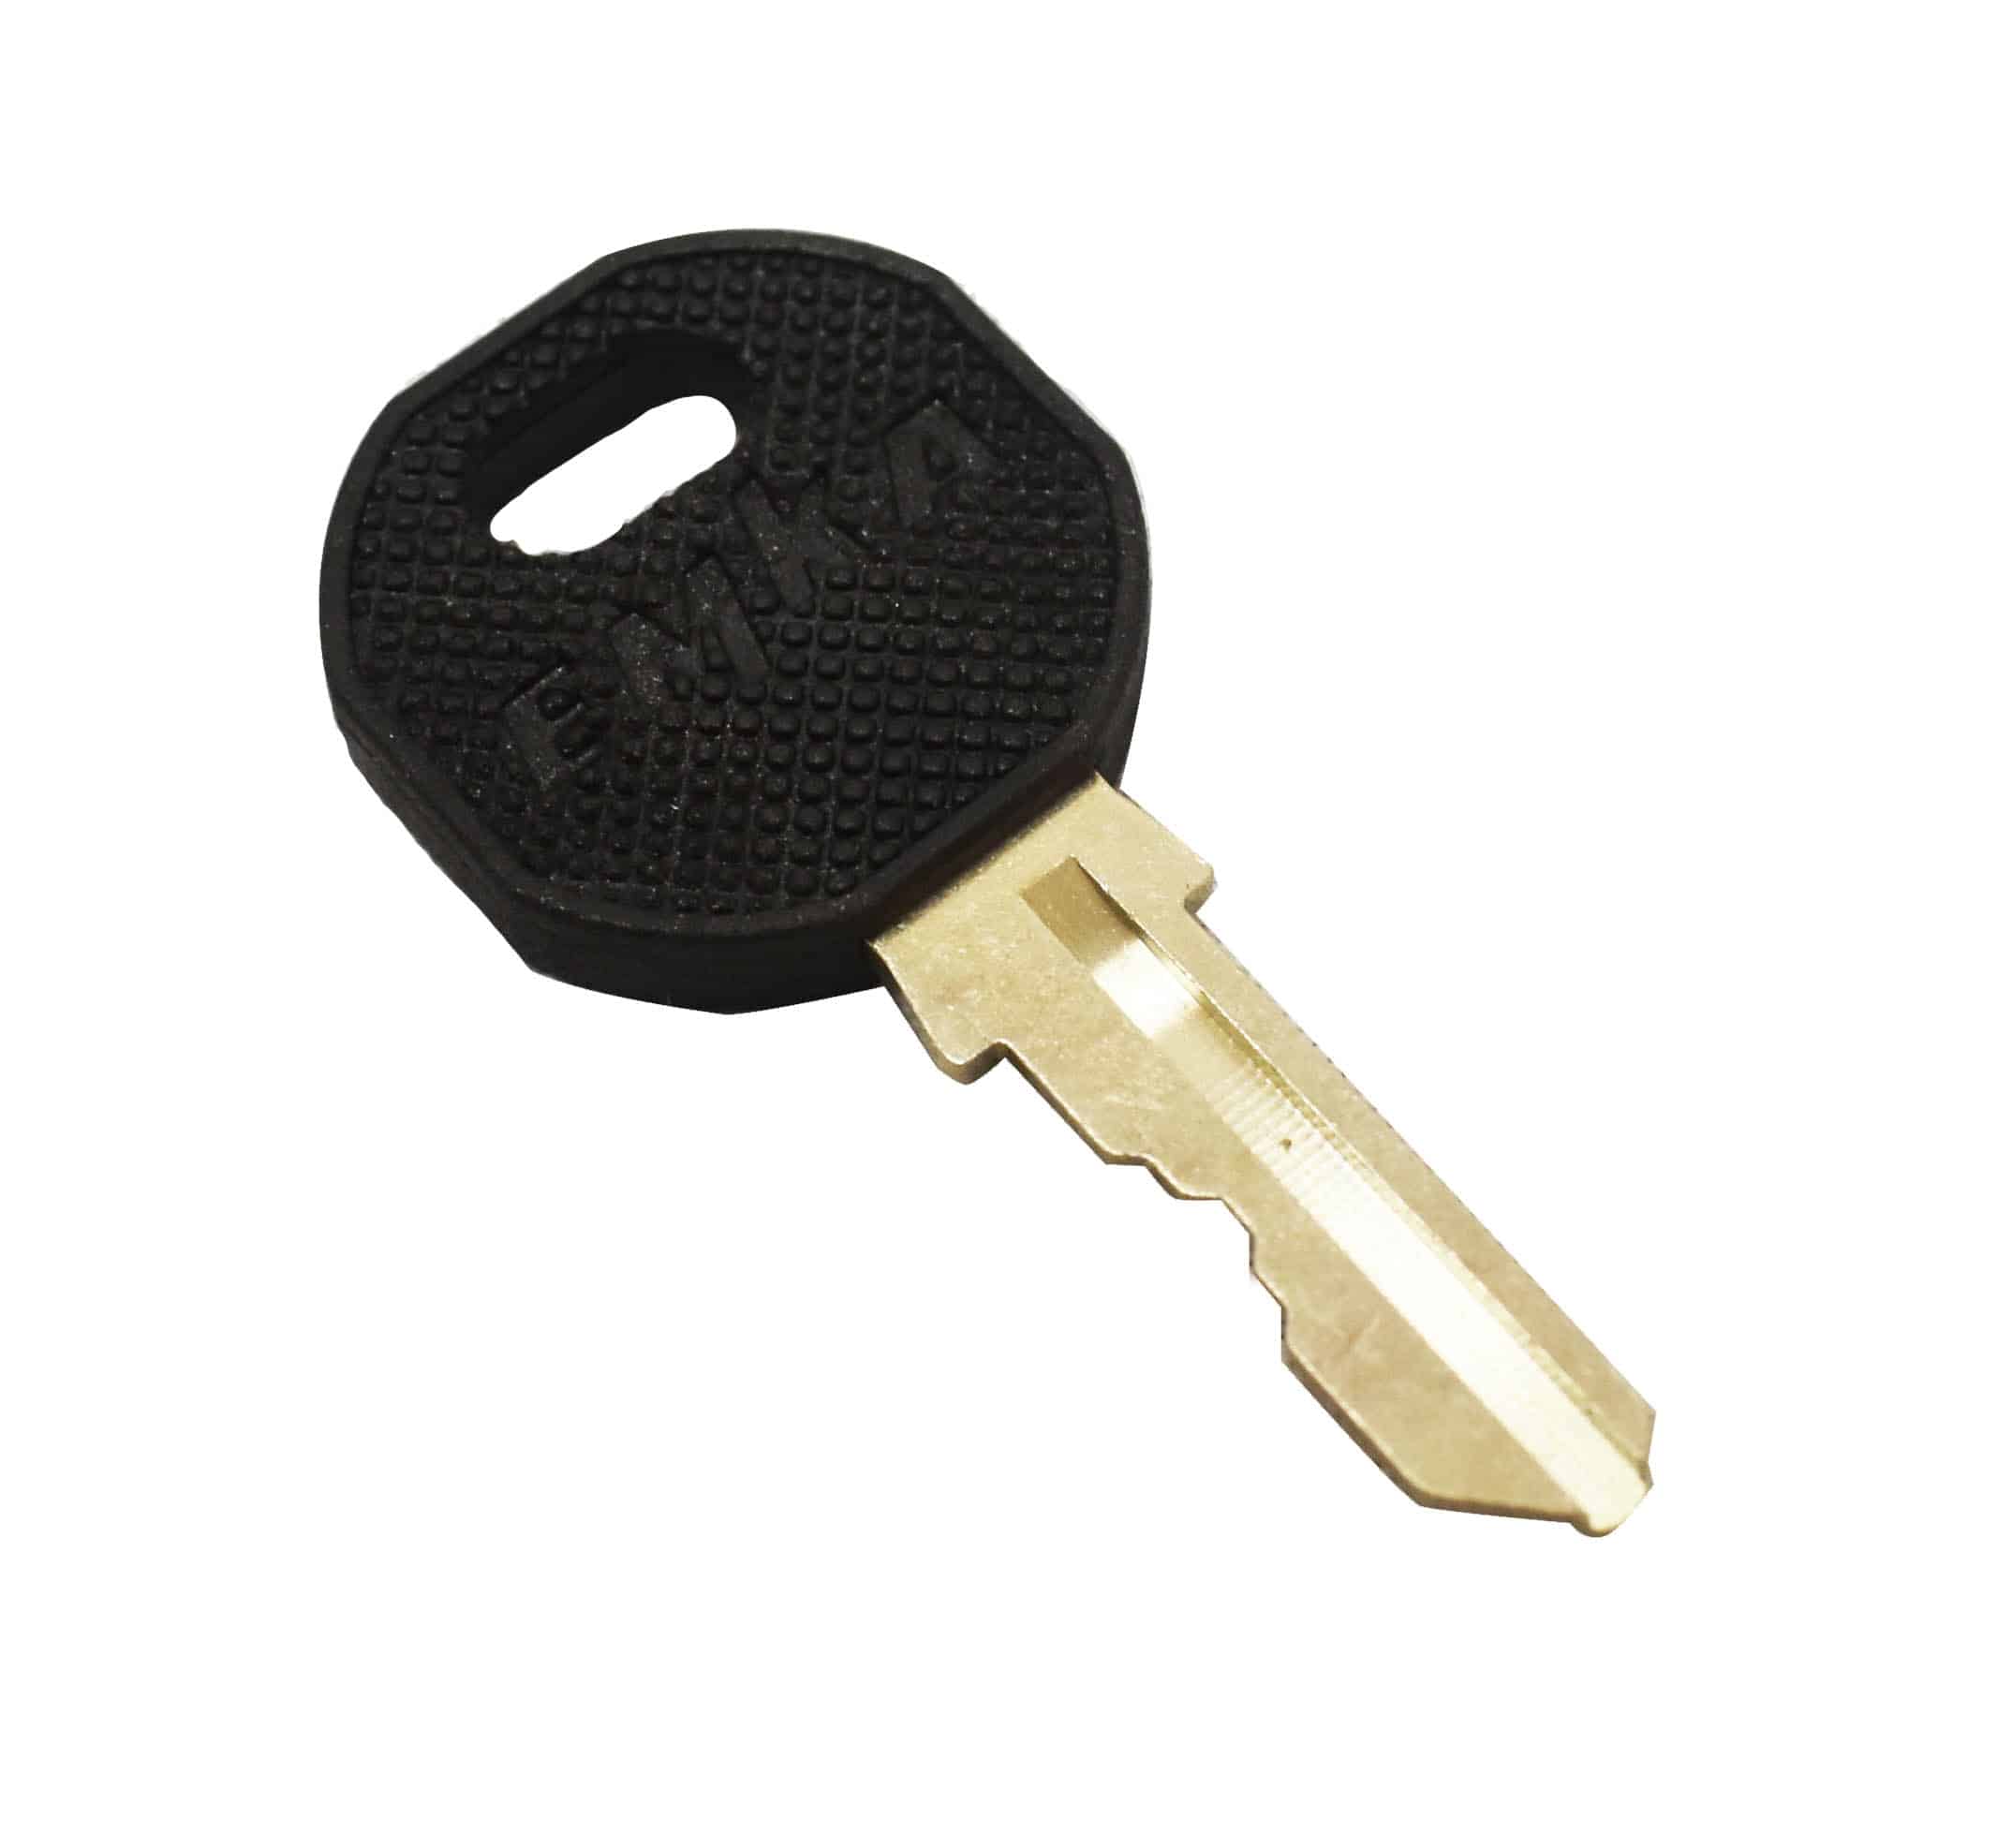 Replacement key for centre pull paper towel dispenser